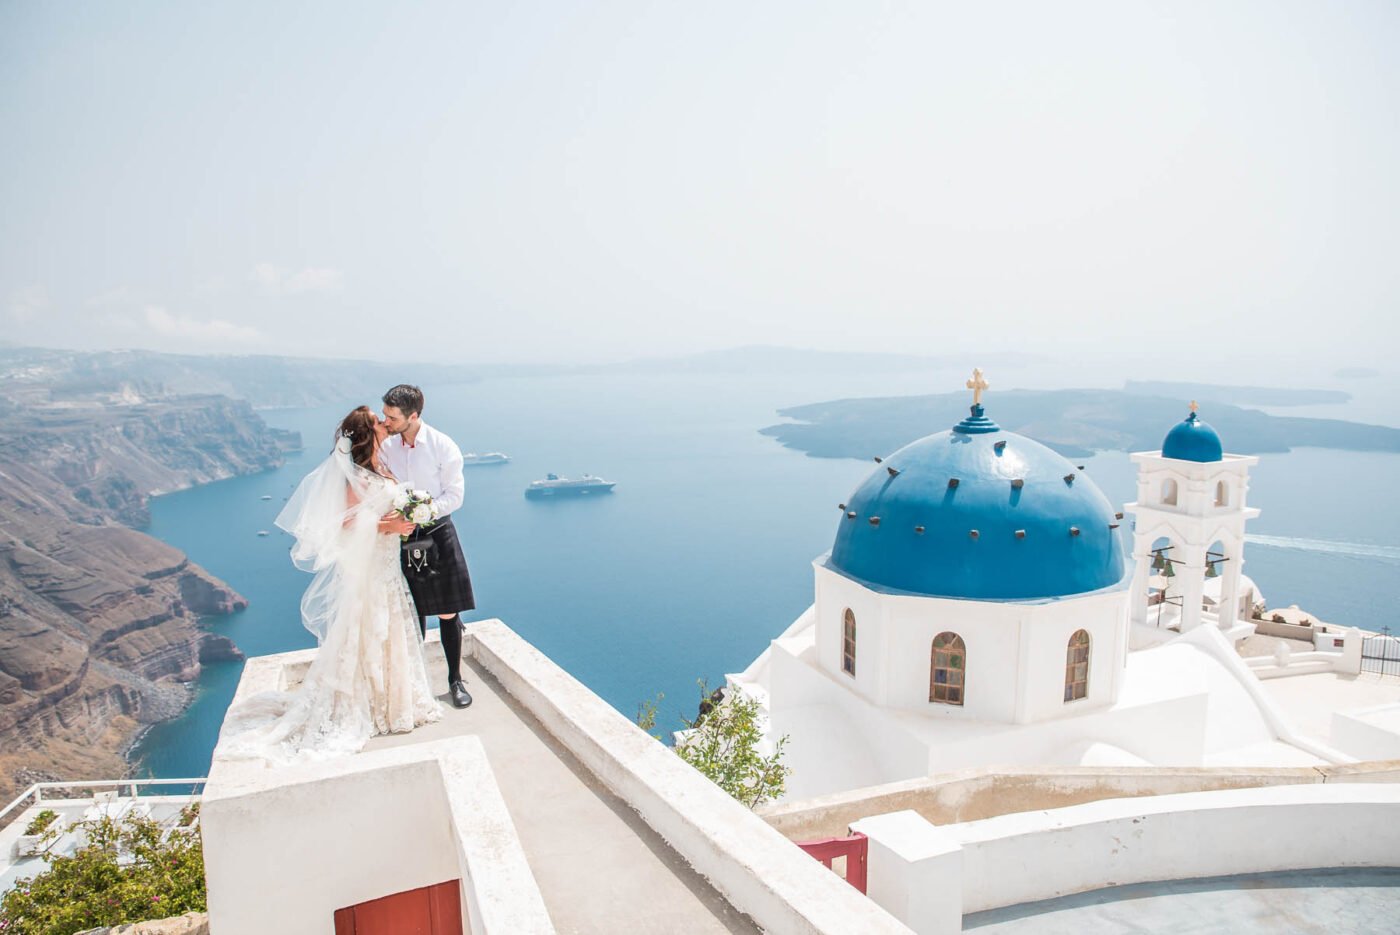 A lovely Scottish Couple Get Married at Gem In Santorini, Unfortunatly With Not the Best Weather, But The View Is Still Amazing